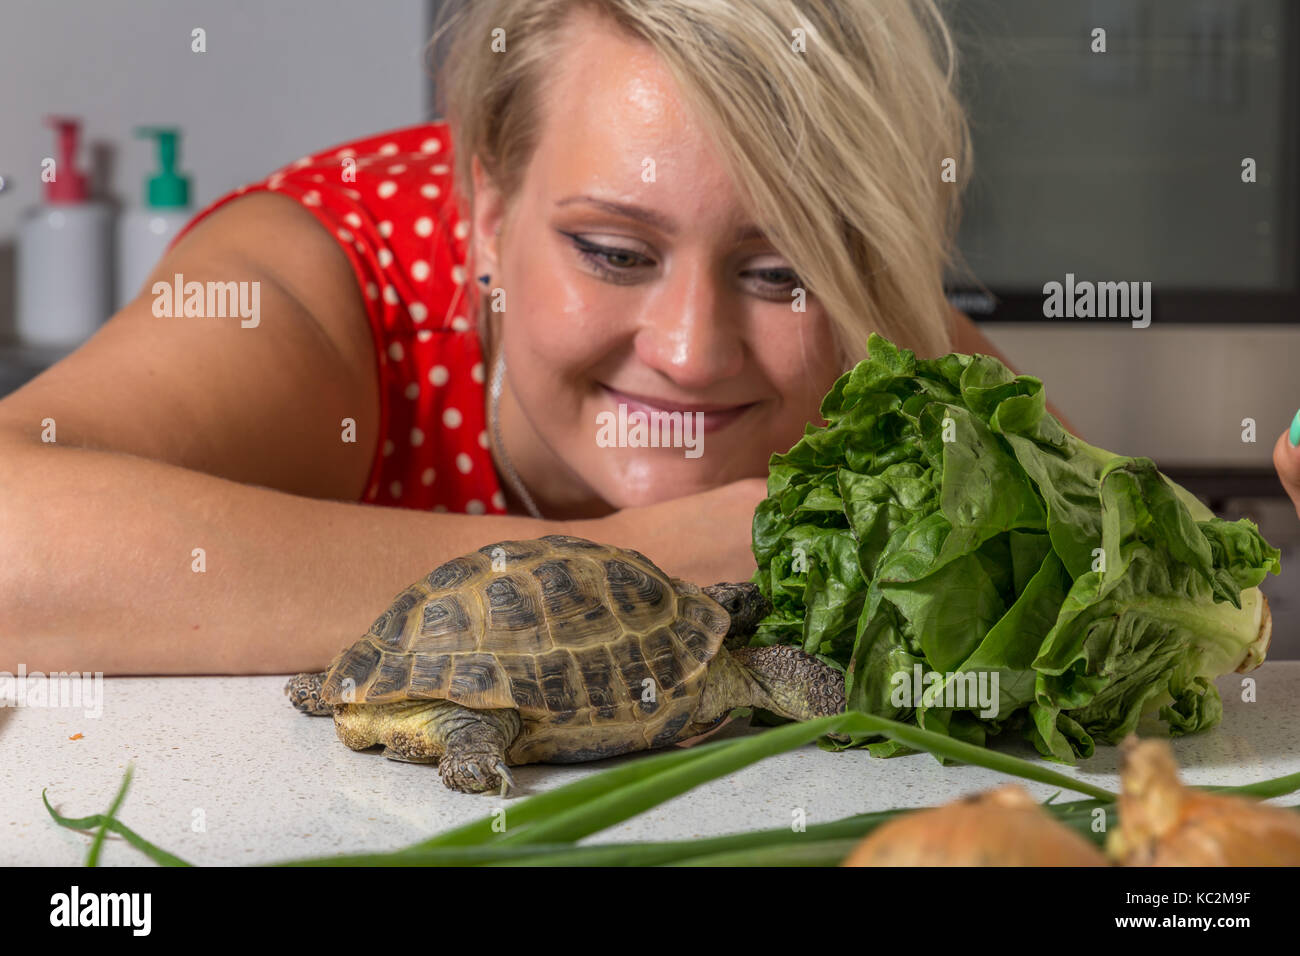 Tortoise eating roman salad while young woman looks at him Stock Photo